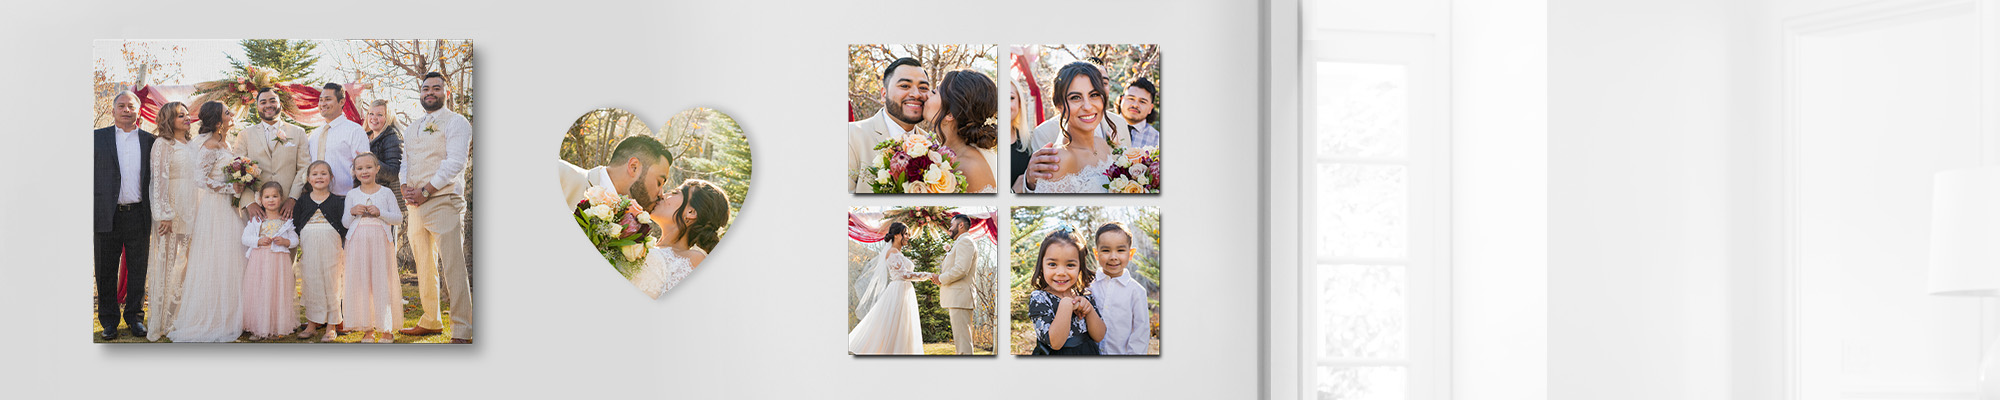 Wedding Photo Cards + Gifts  